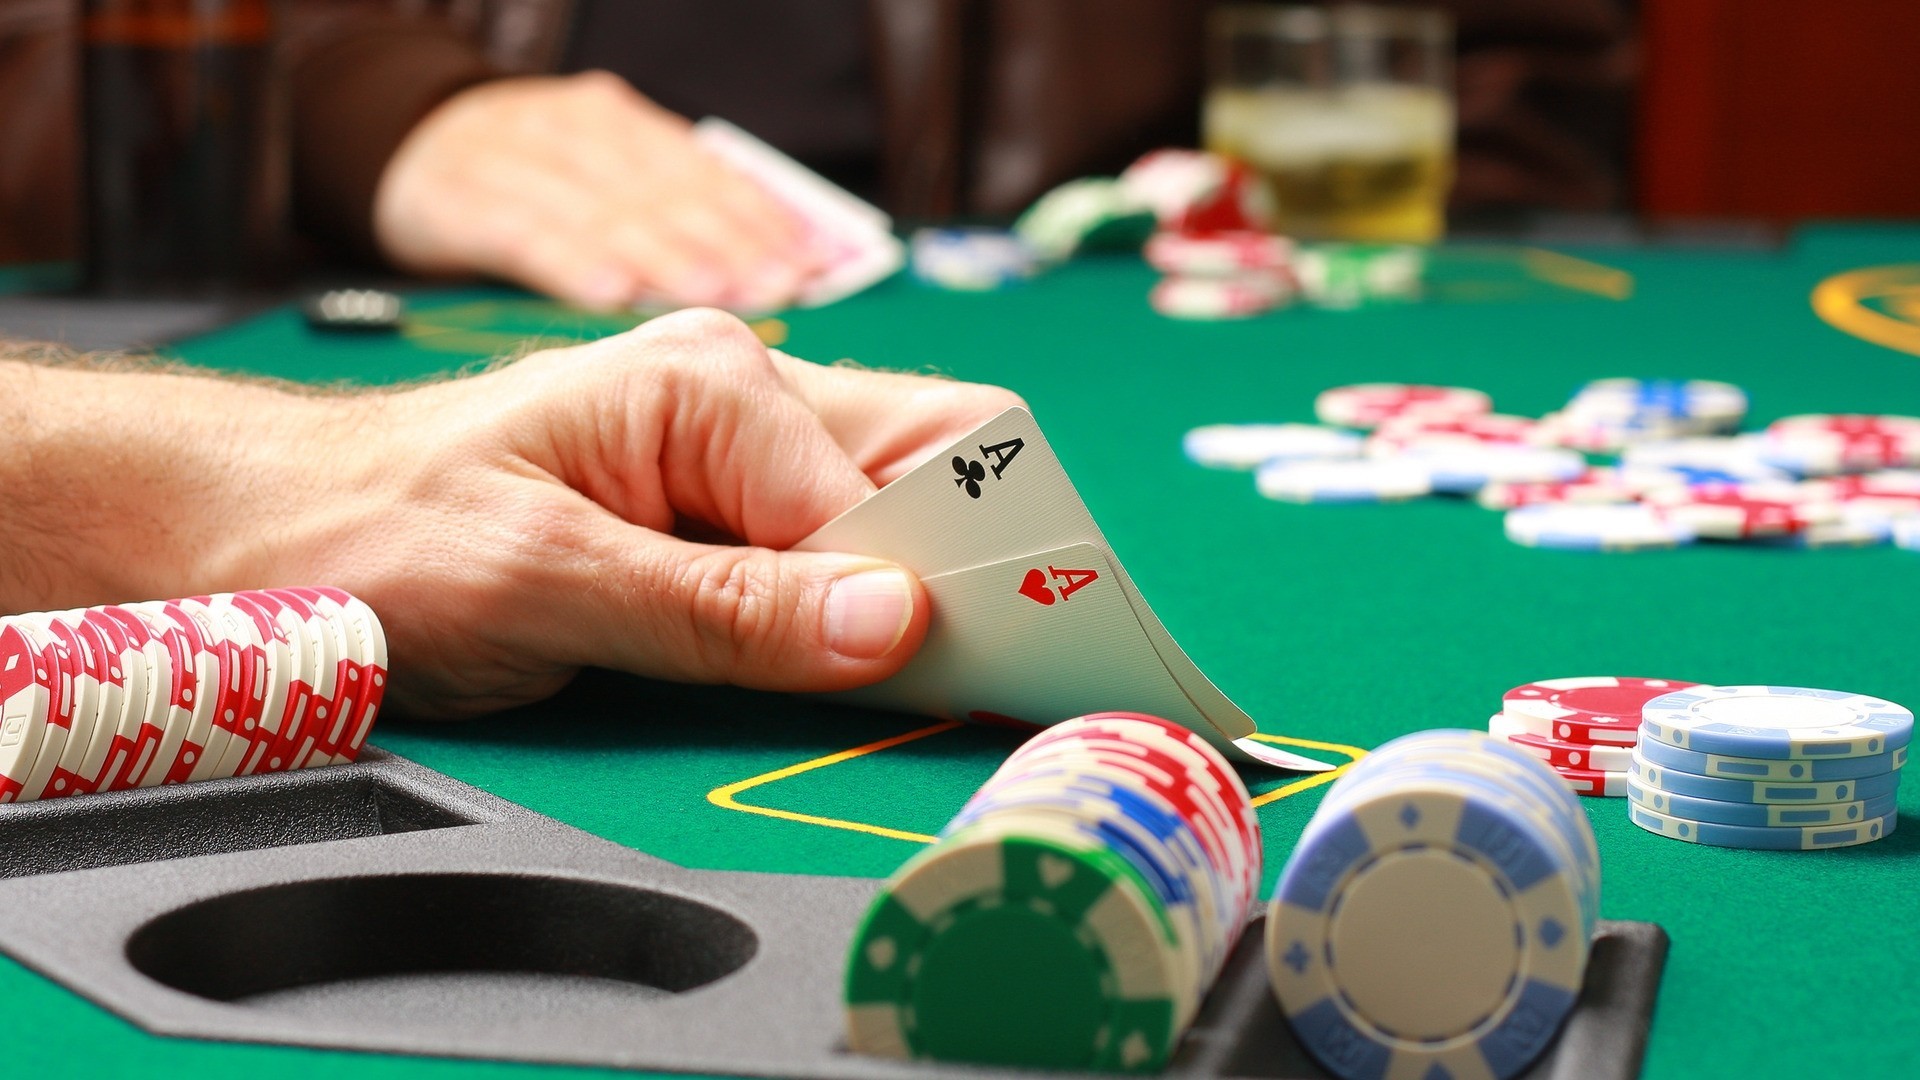 The Simple Gambling That Wins Customers